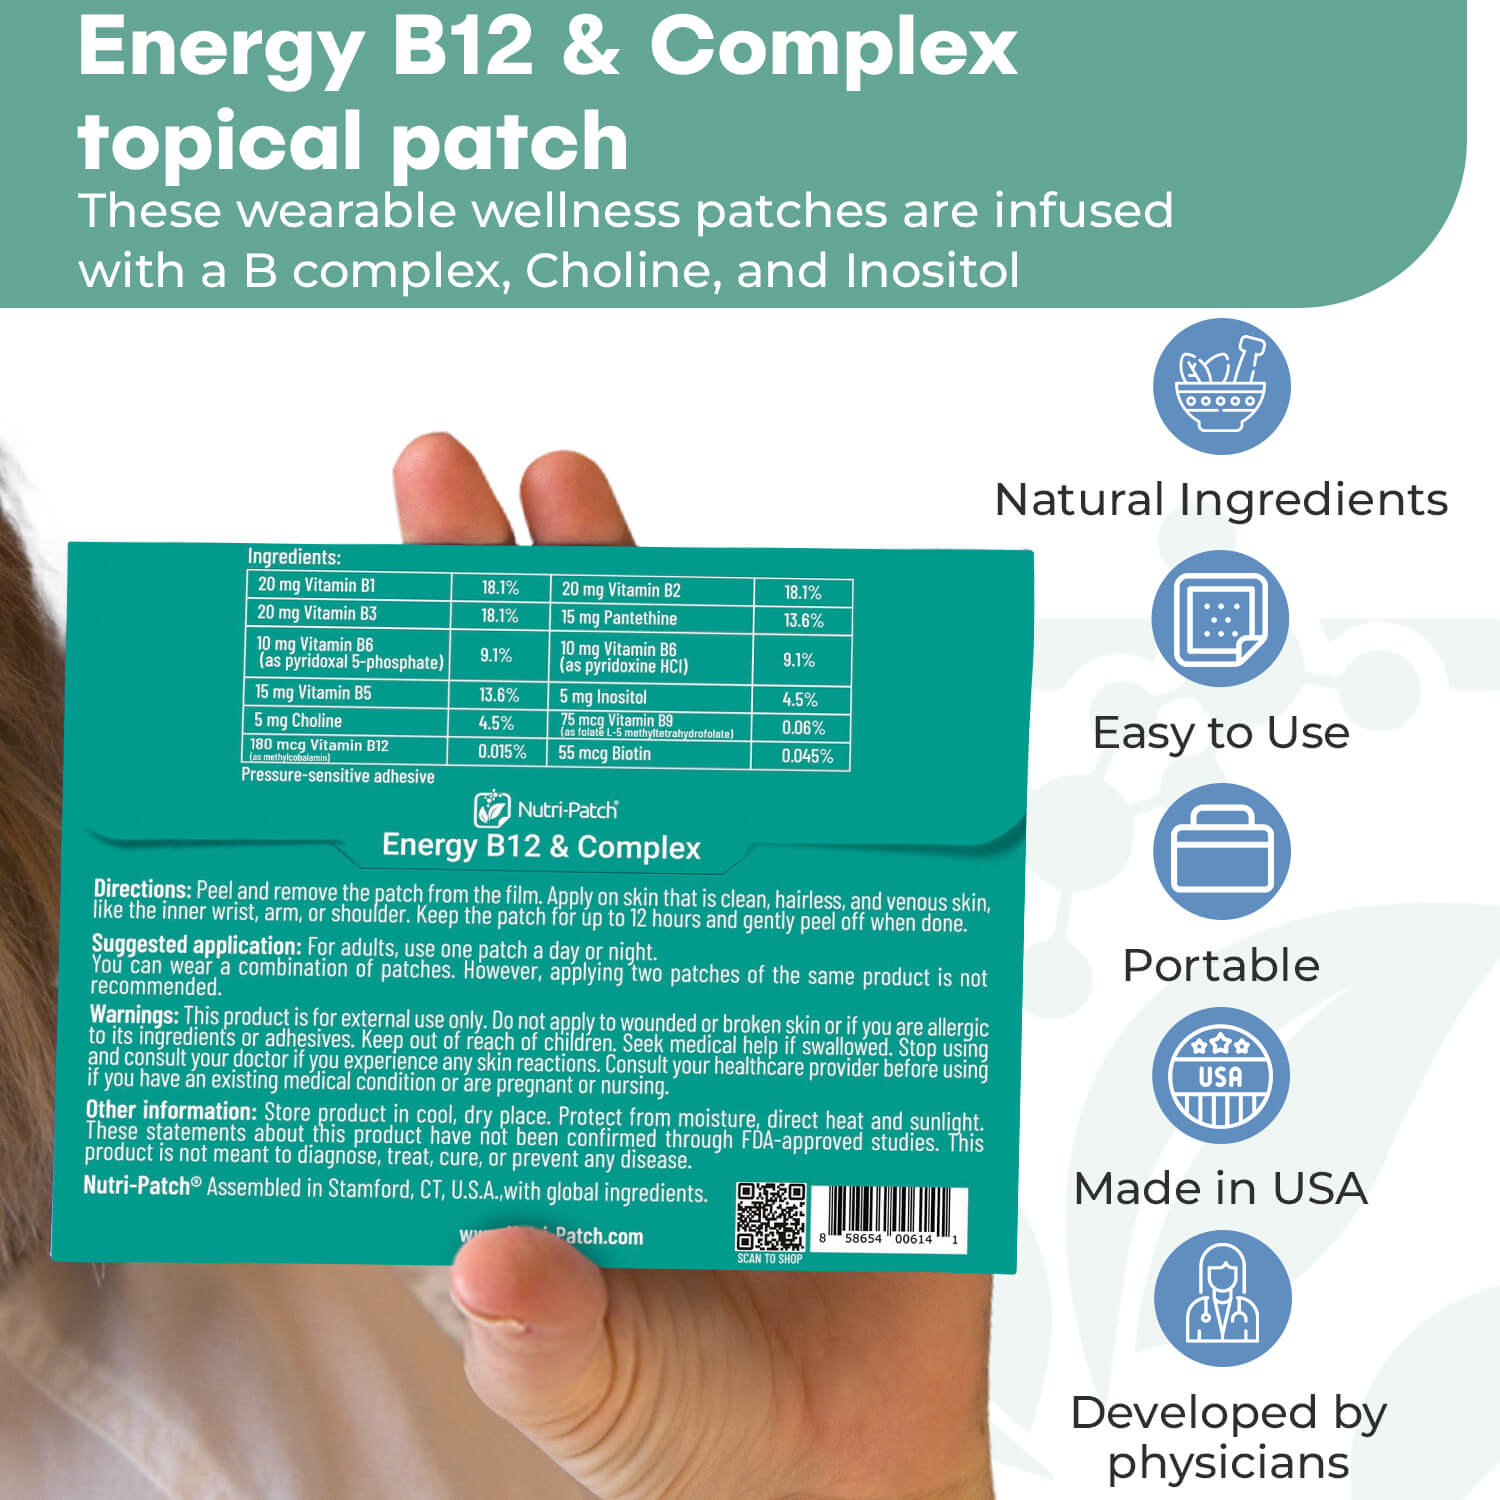 ENERGY B-12 & COMPLEX Topical Patch | Nutri-Patch®